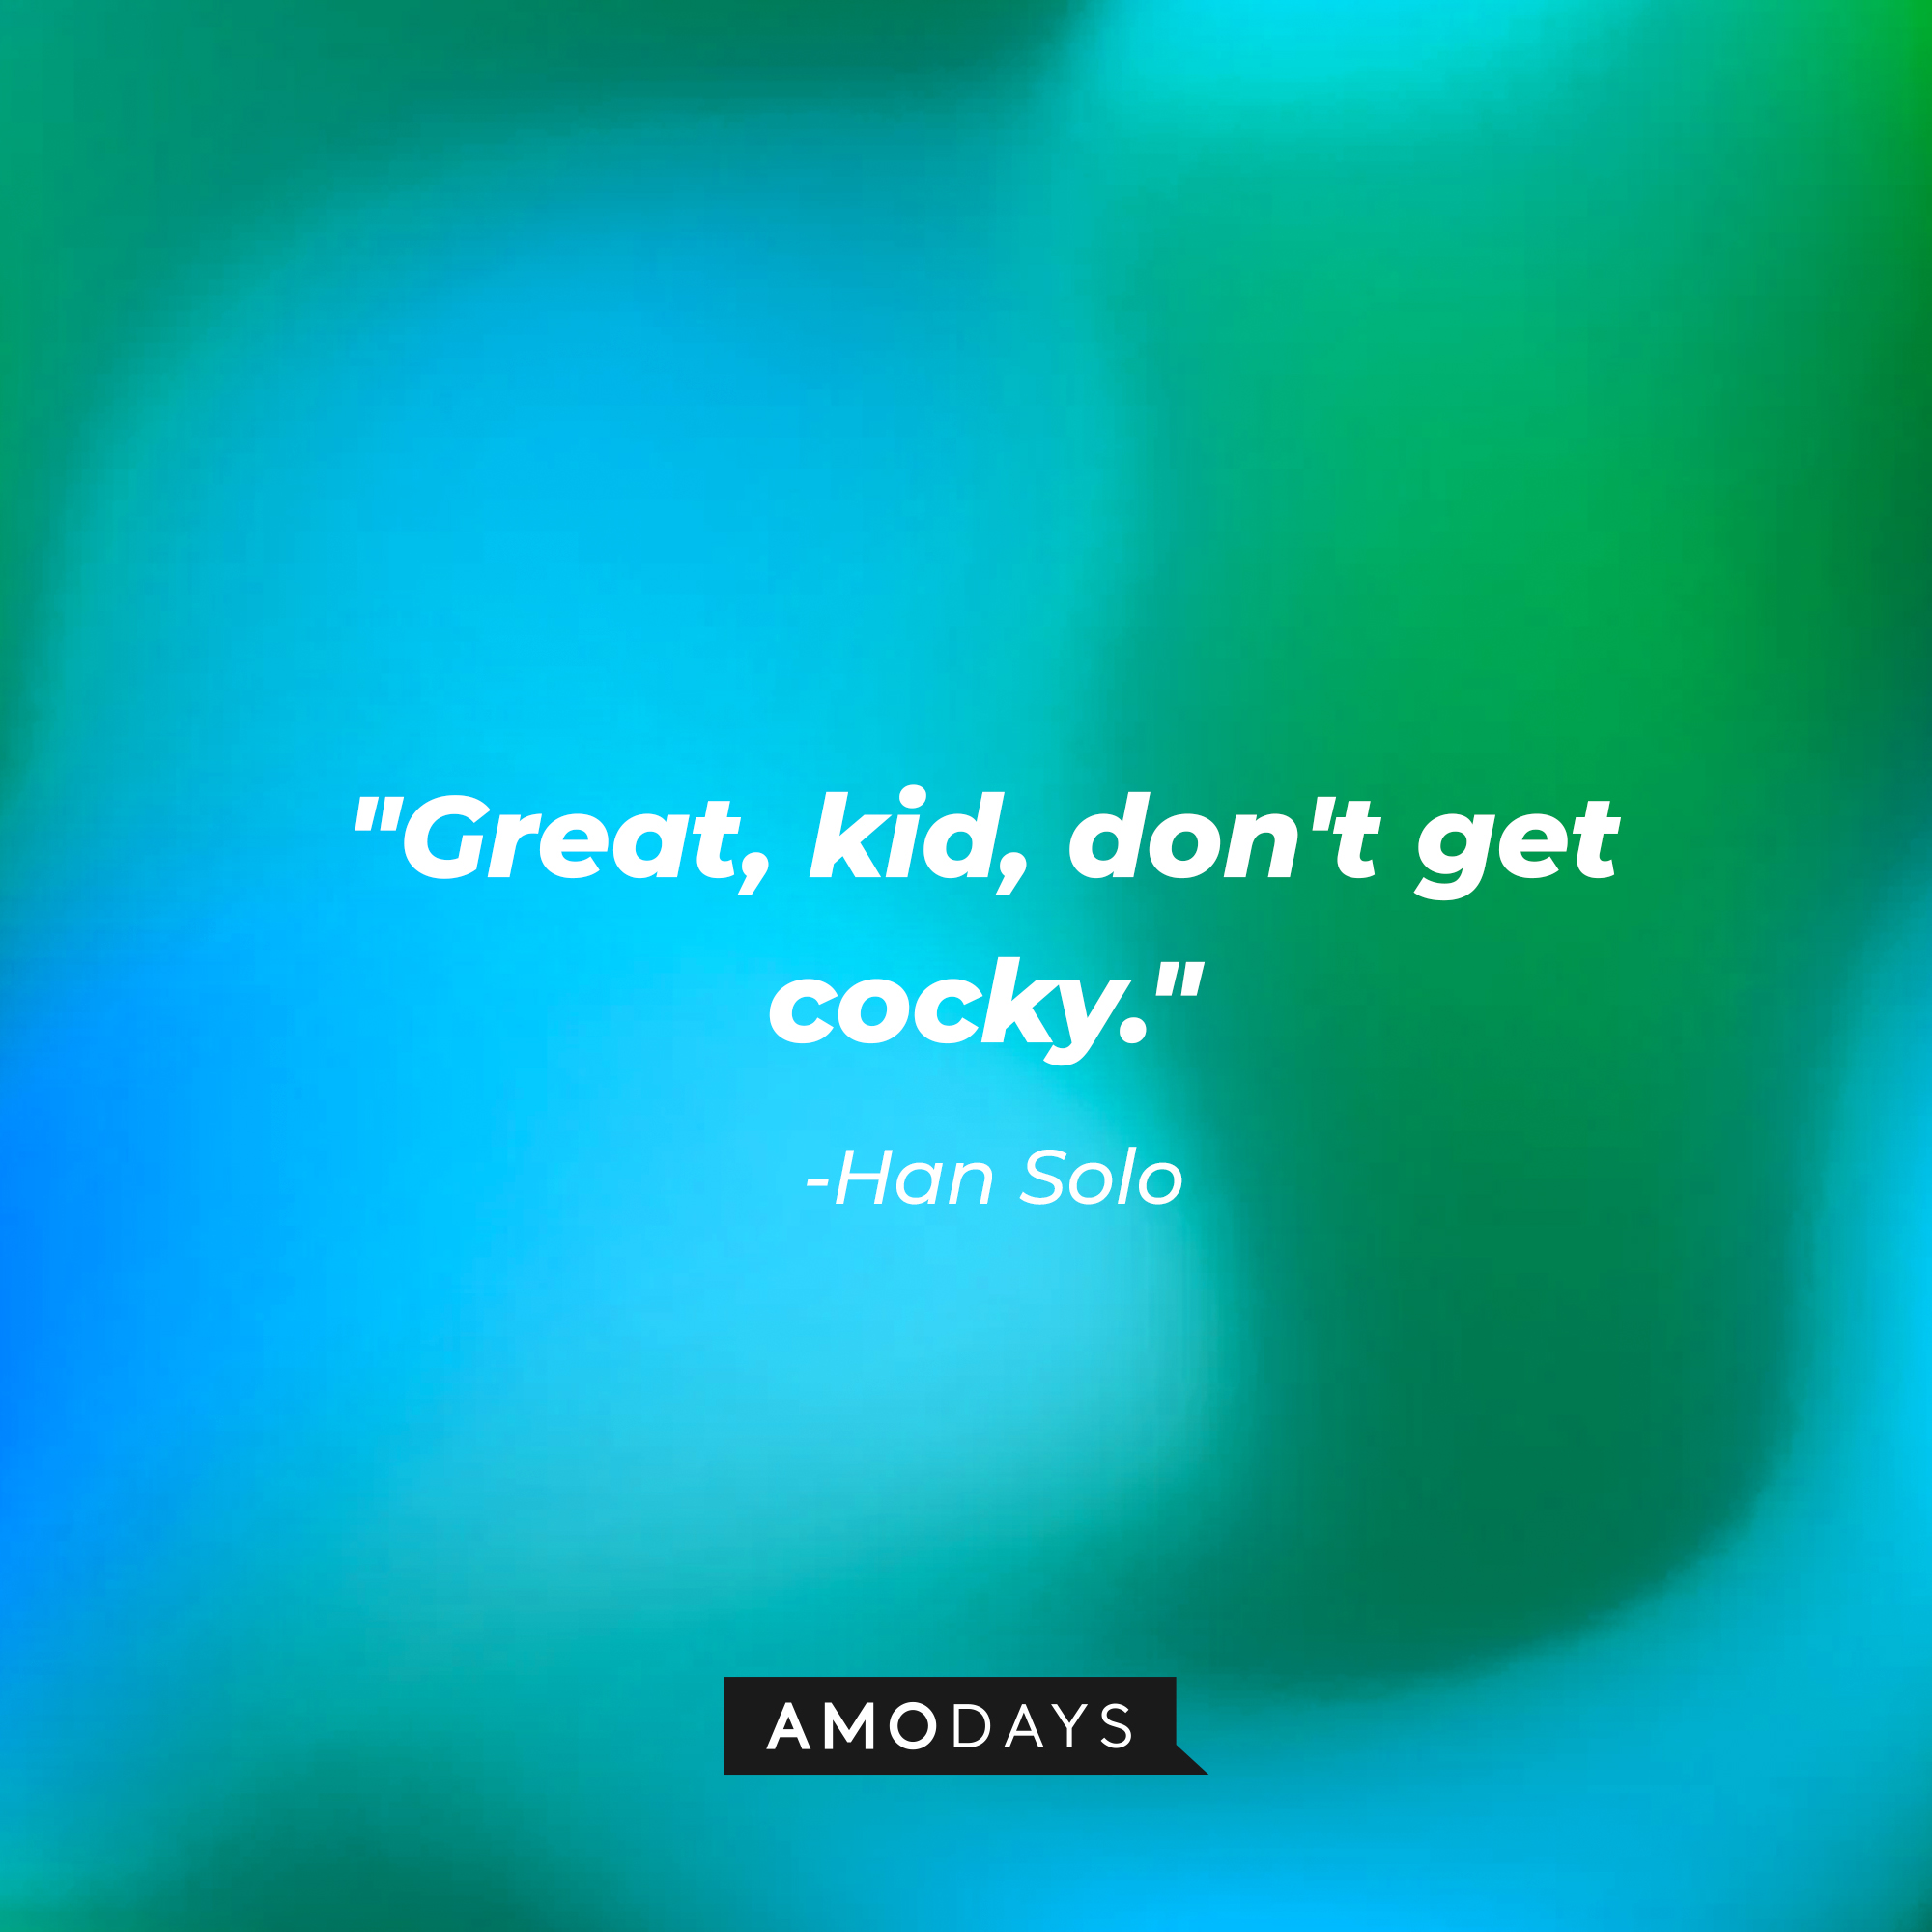 Han Solo’s quote: "Great, kid, don't get cocky." | Source: AmoDays